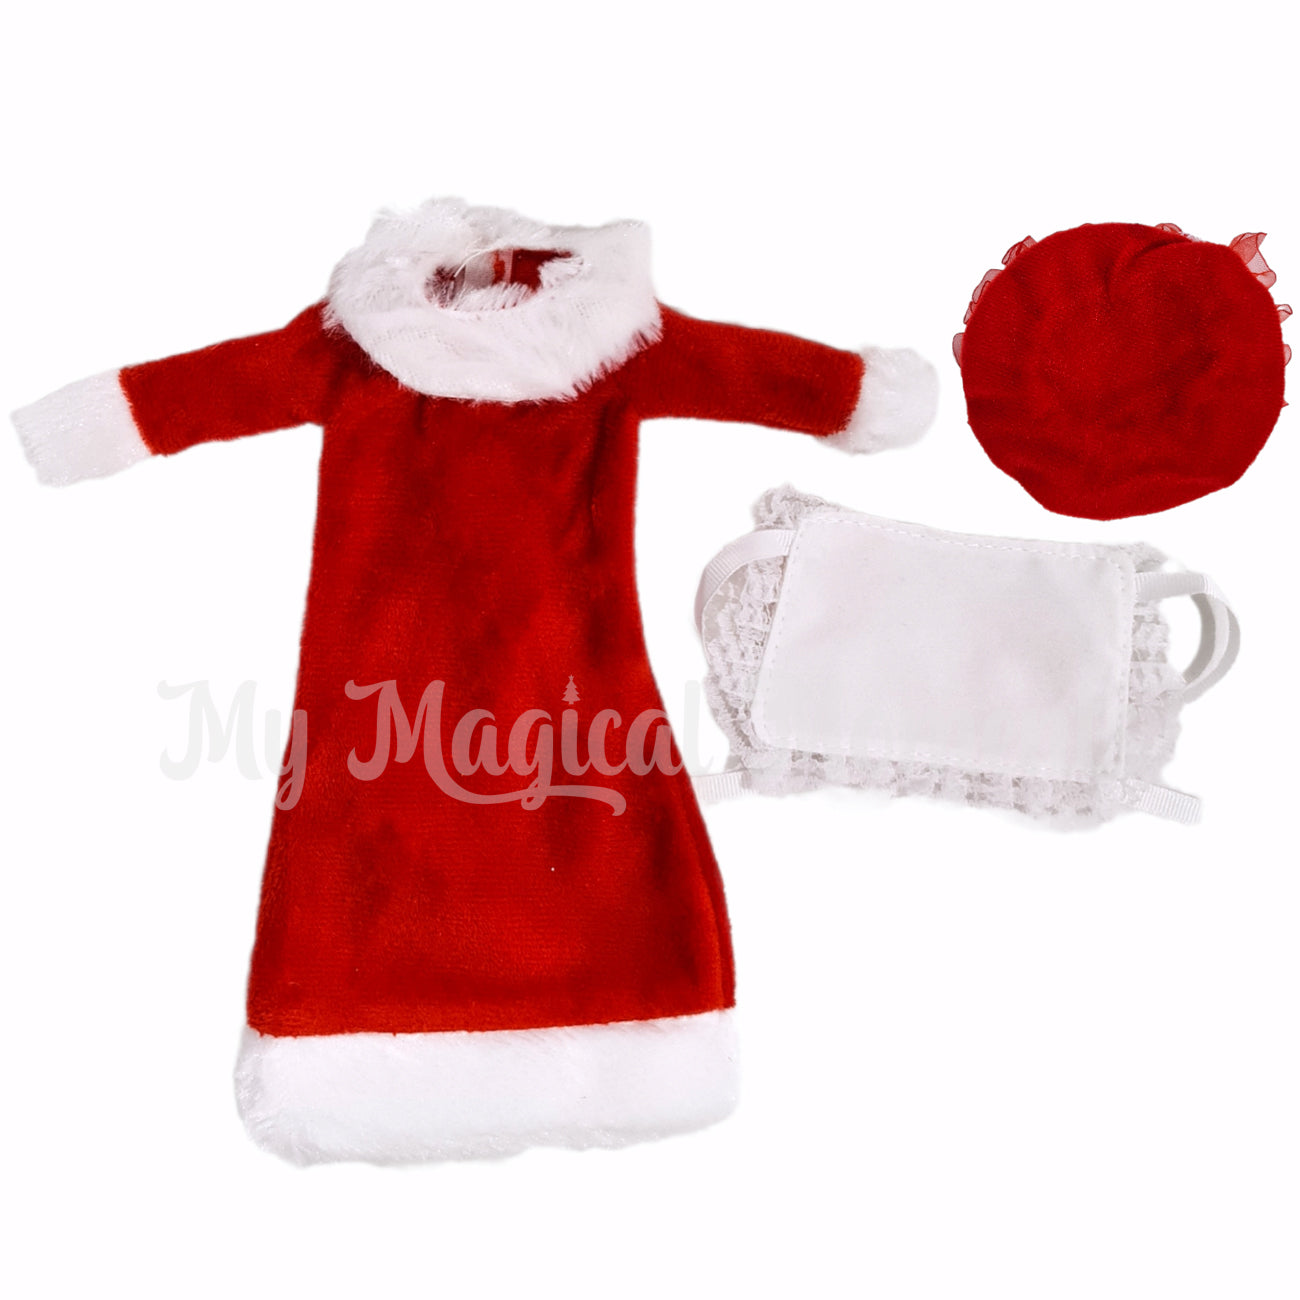 Mr claus elf costume. Red dress, white apron and hat